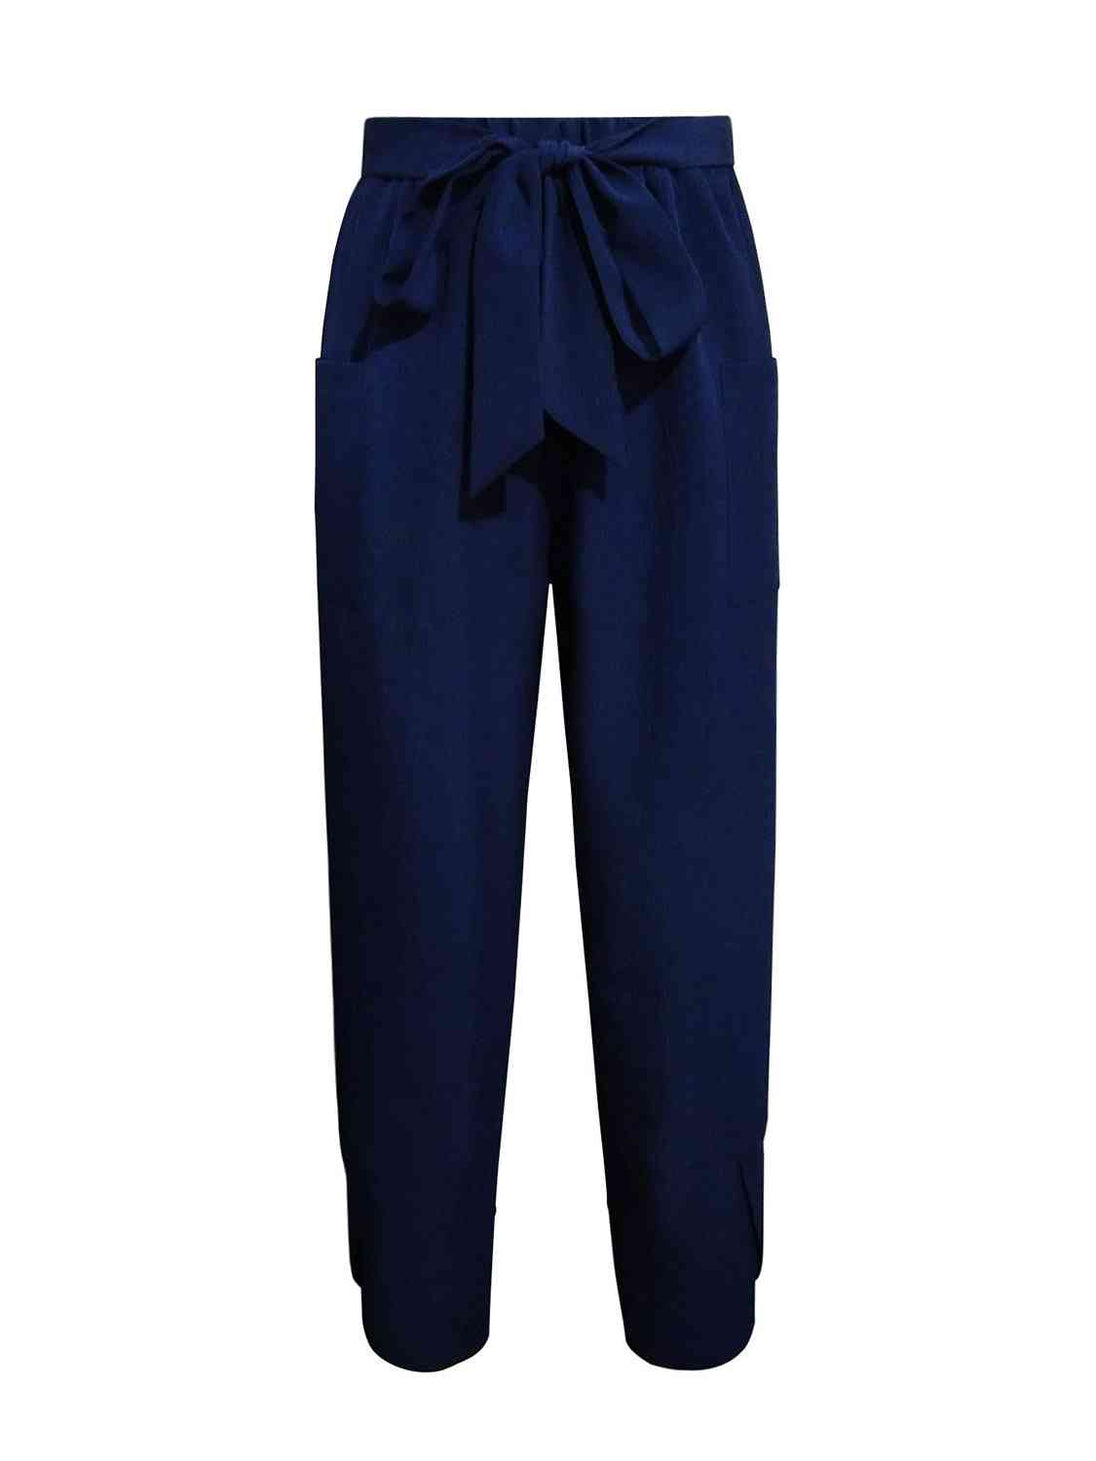 Tie Front Pants with Pockets Bazaarbey